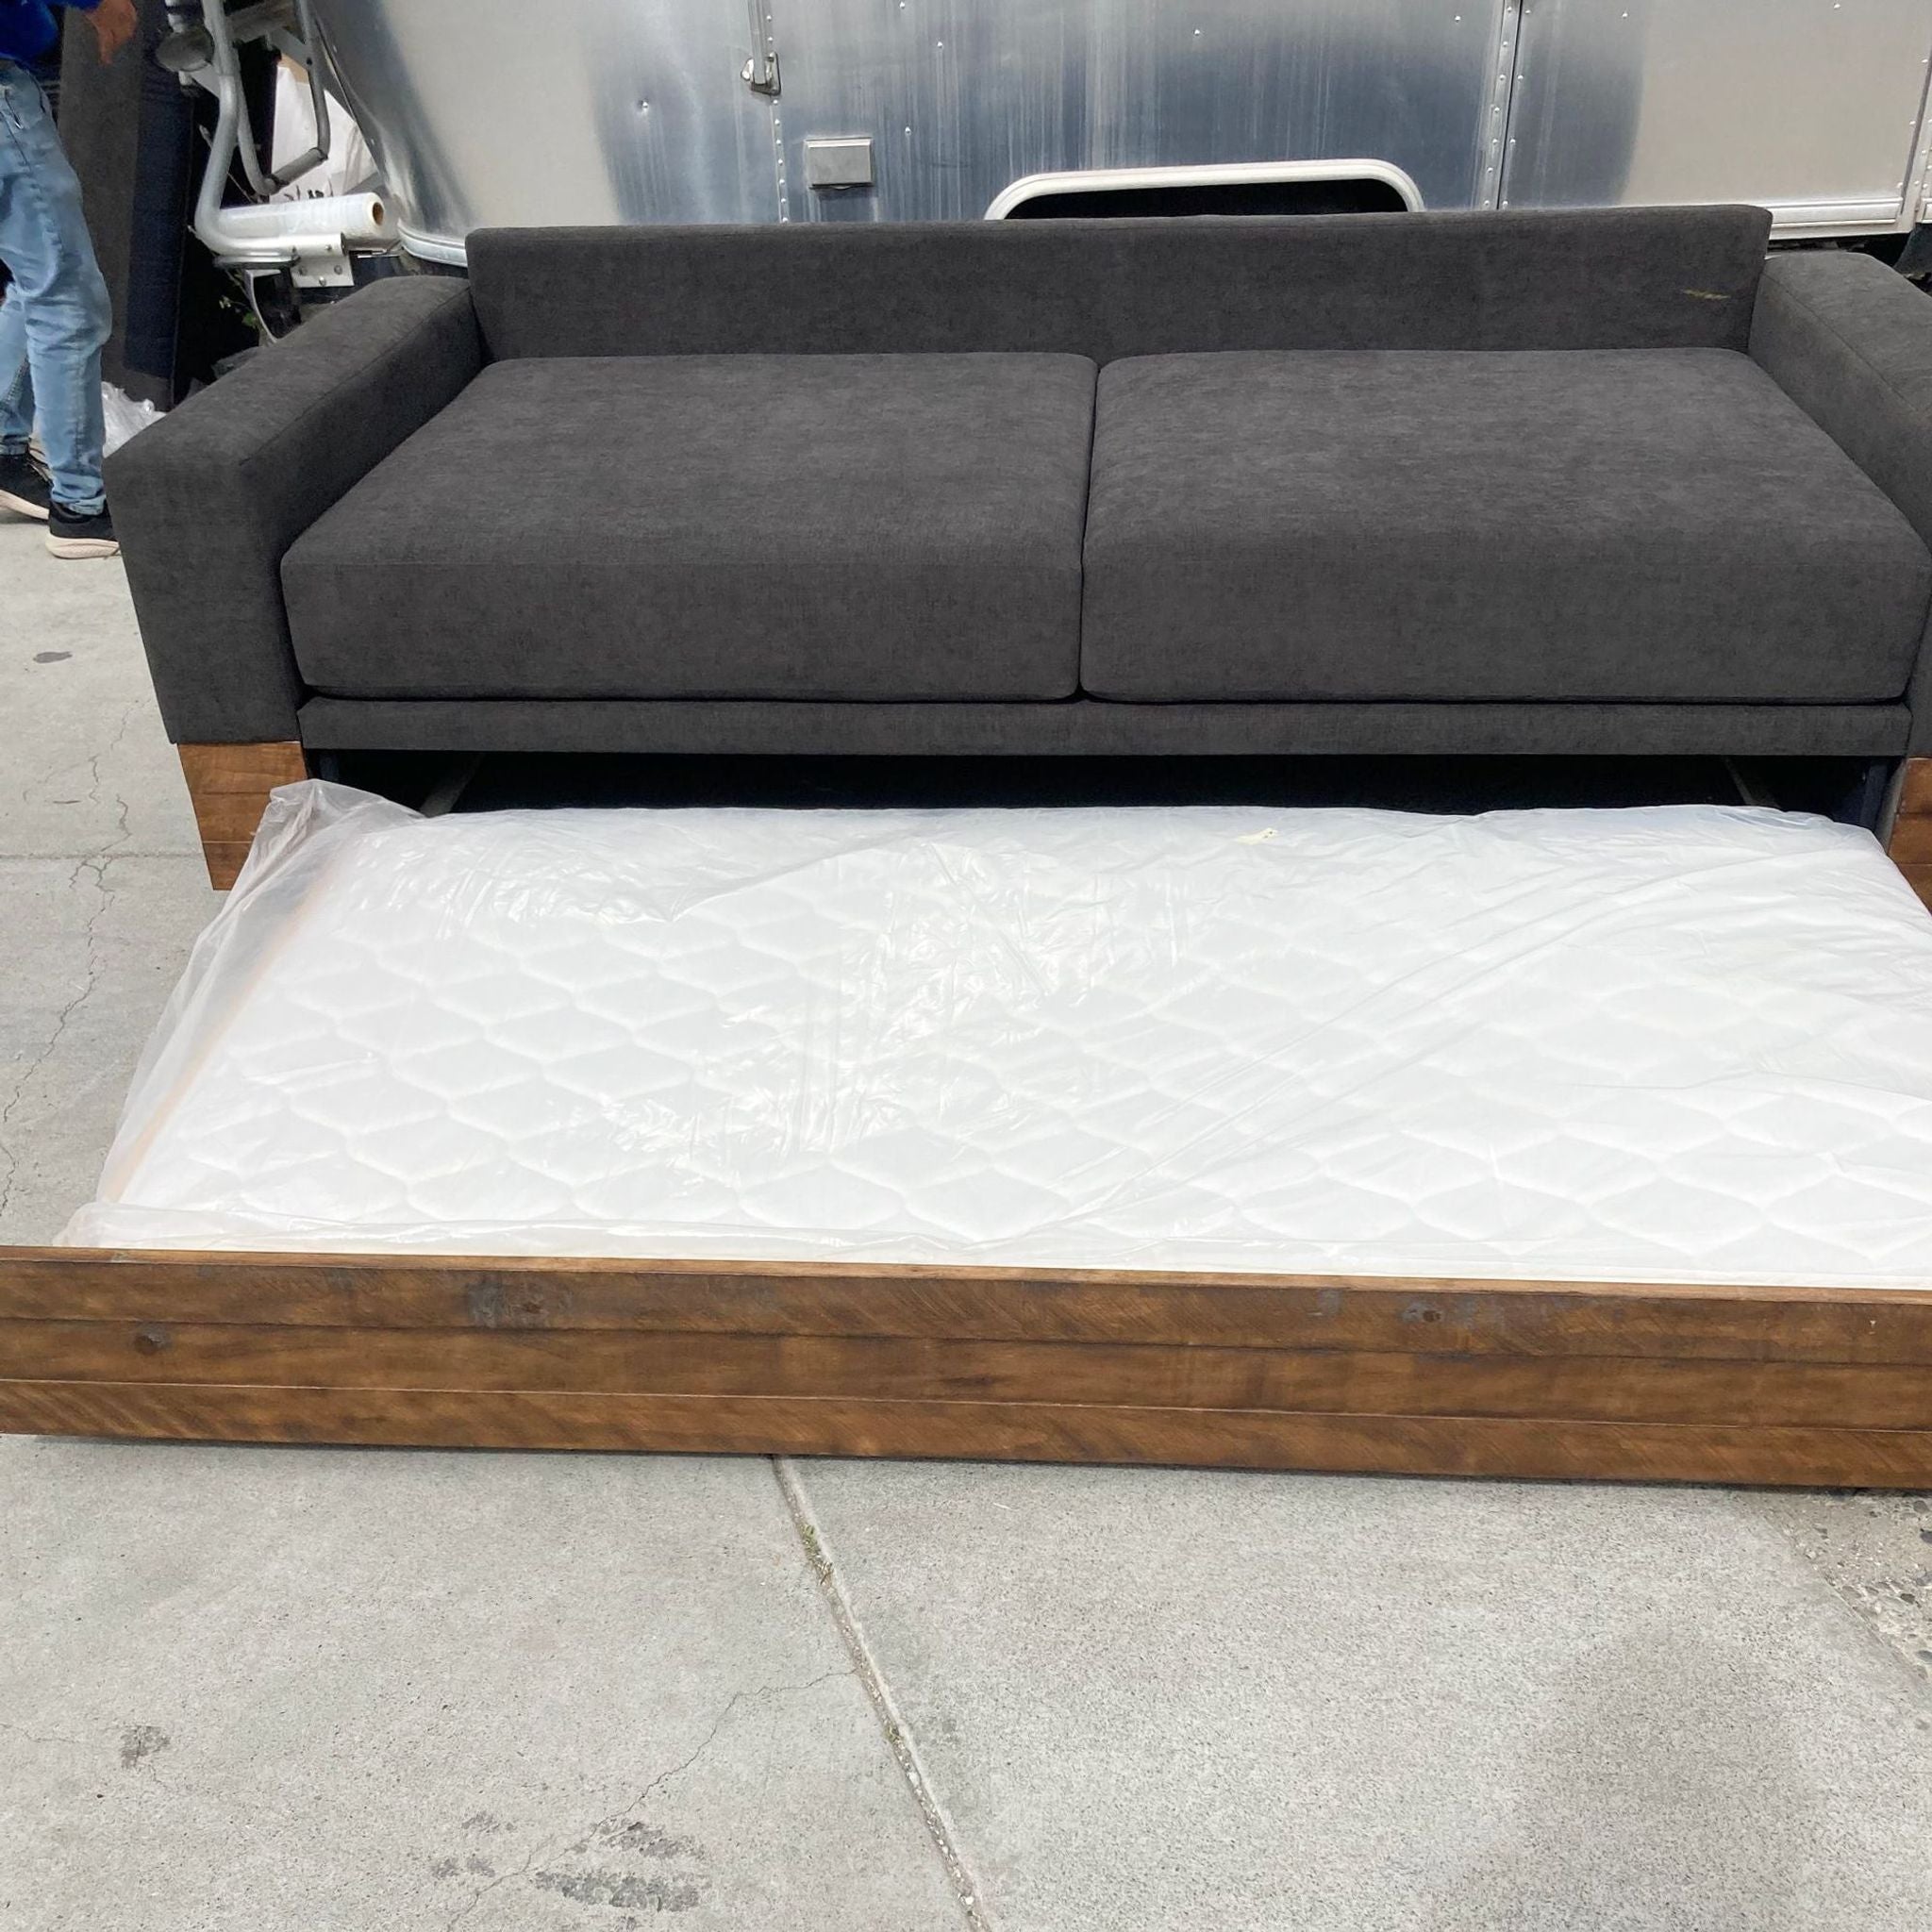 West Elm sleeper sofa with extended trundle on wheels, showcasing mattress and wooden base.